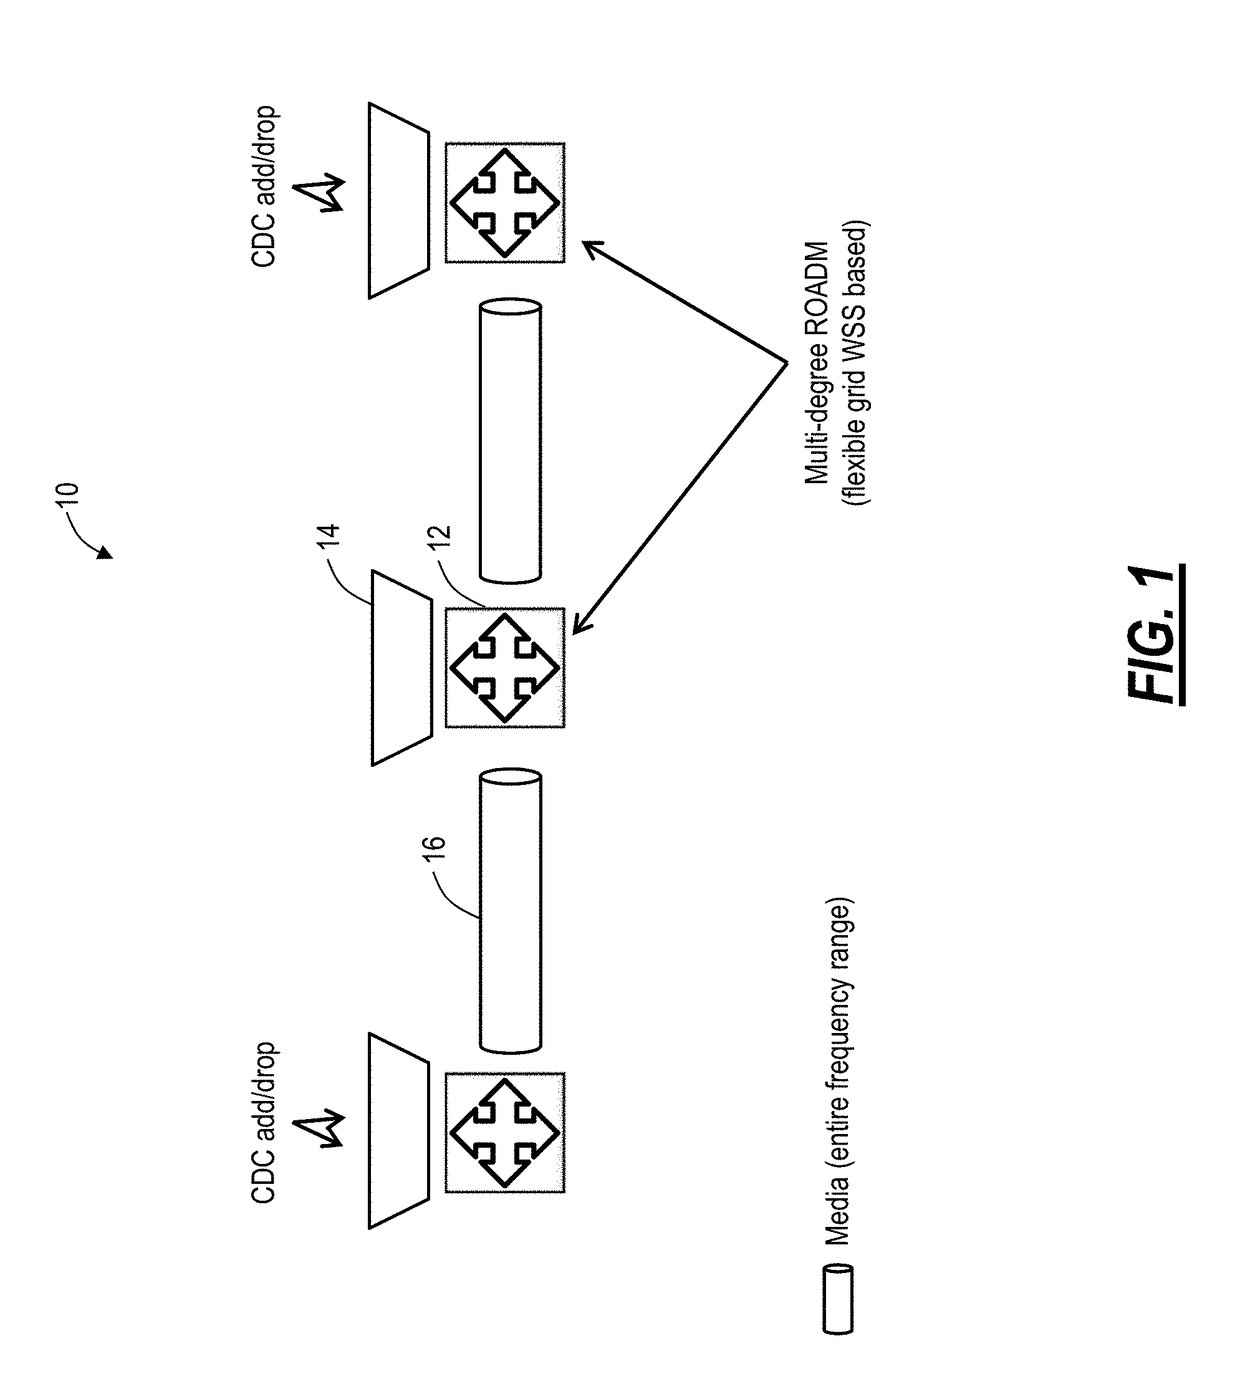 Management of flexible grid and supercarriers in optical networks using a data model